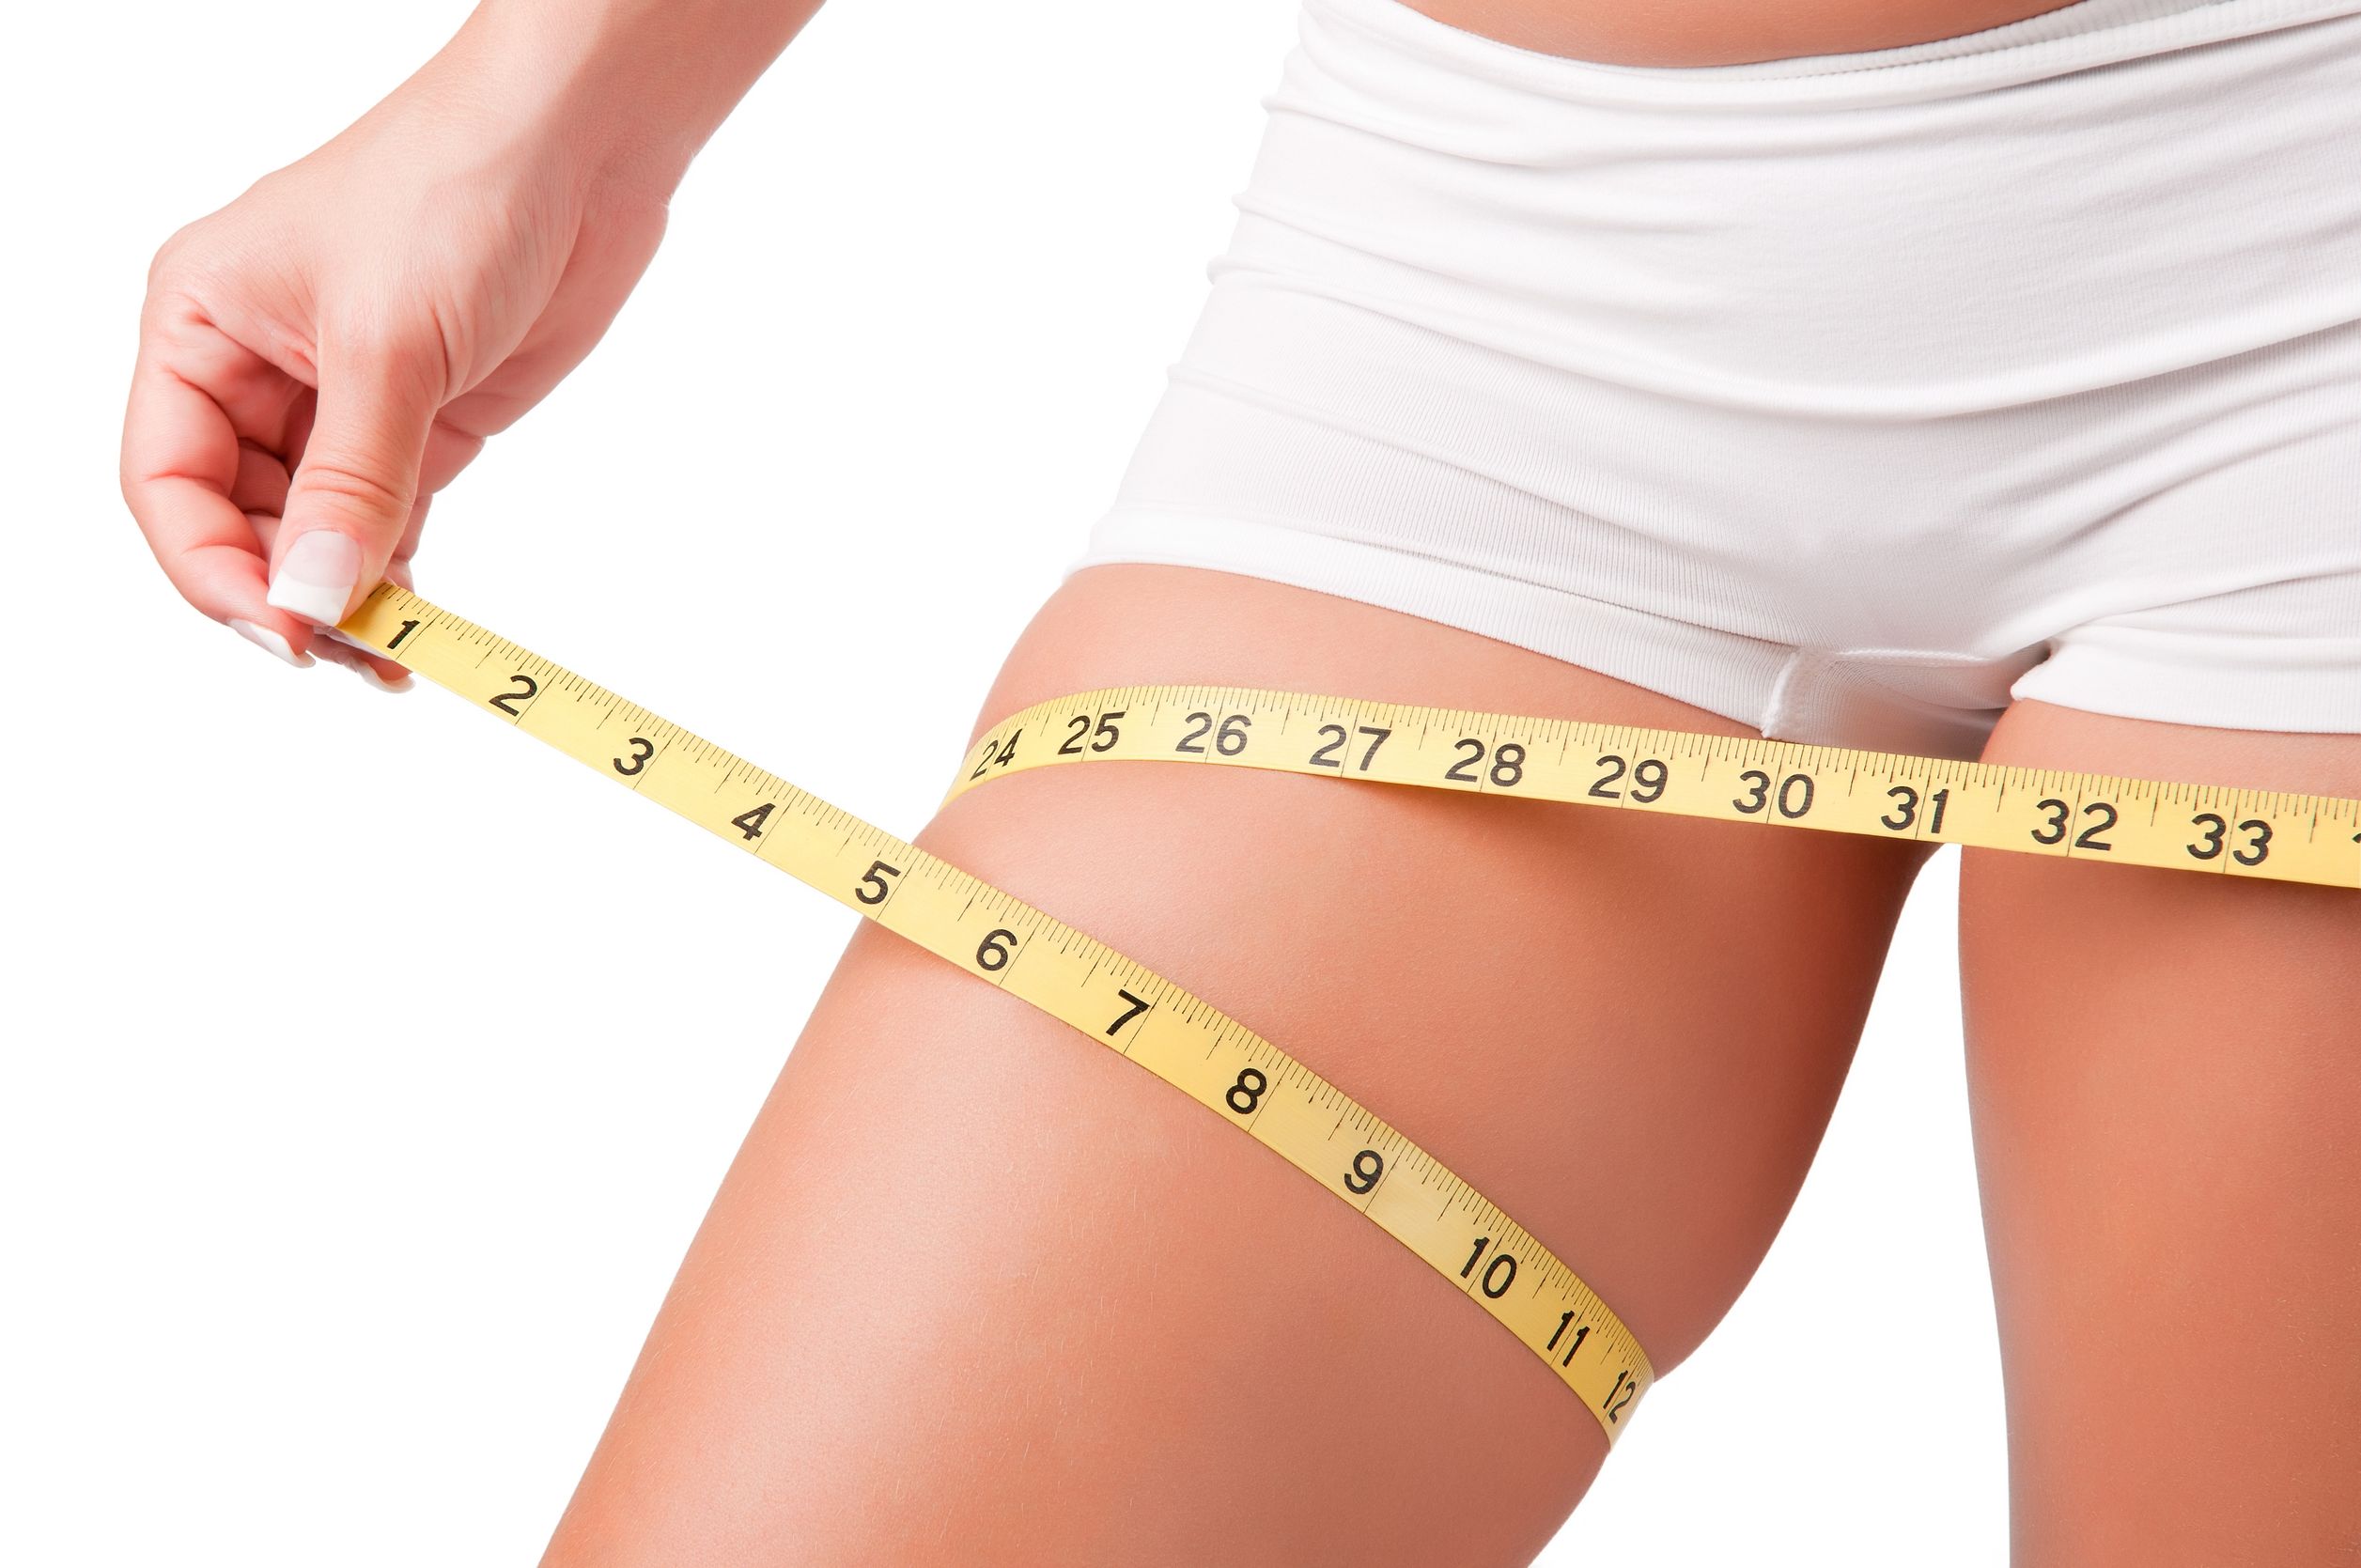 Chub Rub: 7 Ways To Stop Inner Thigh Chafing While Losing Weight - SlendHer